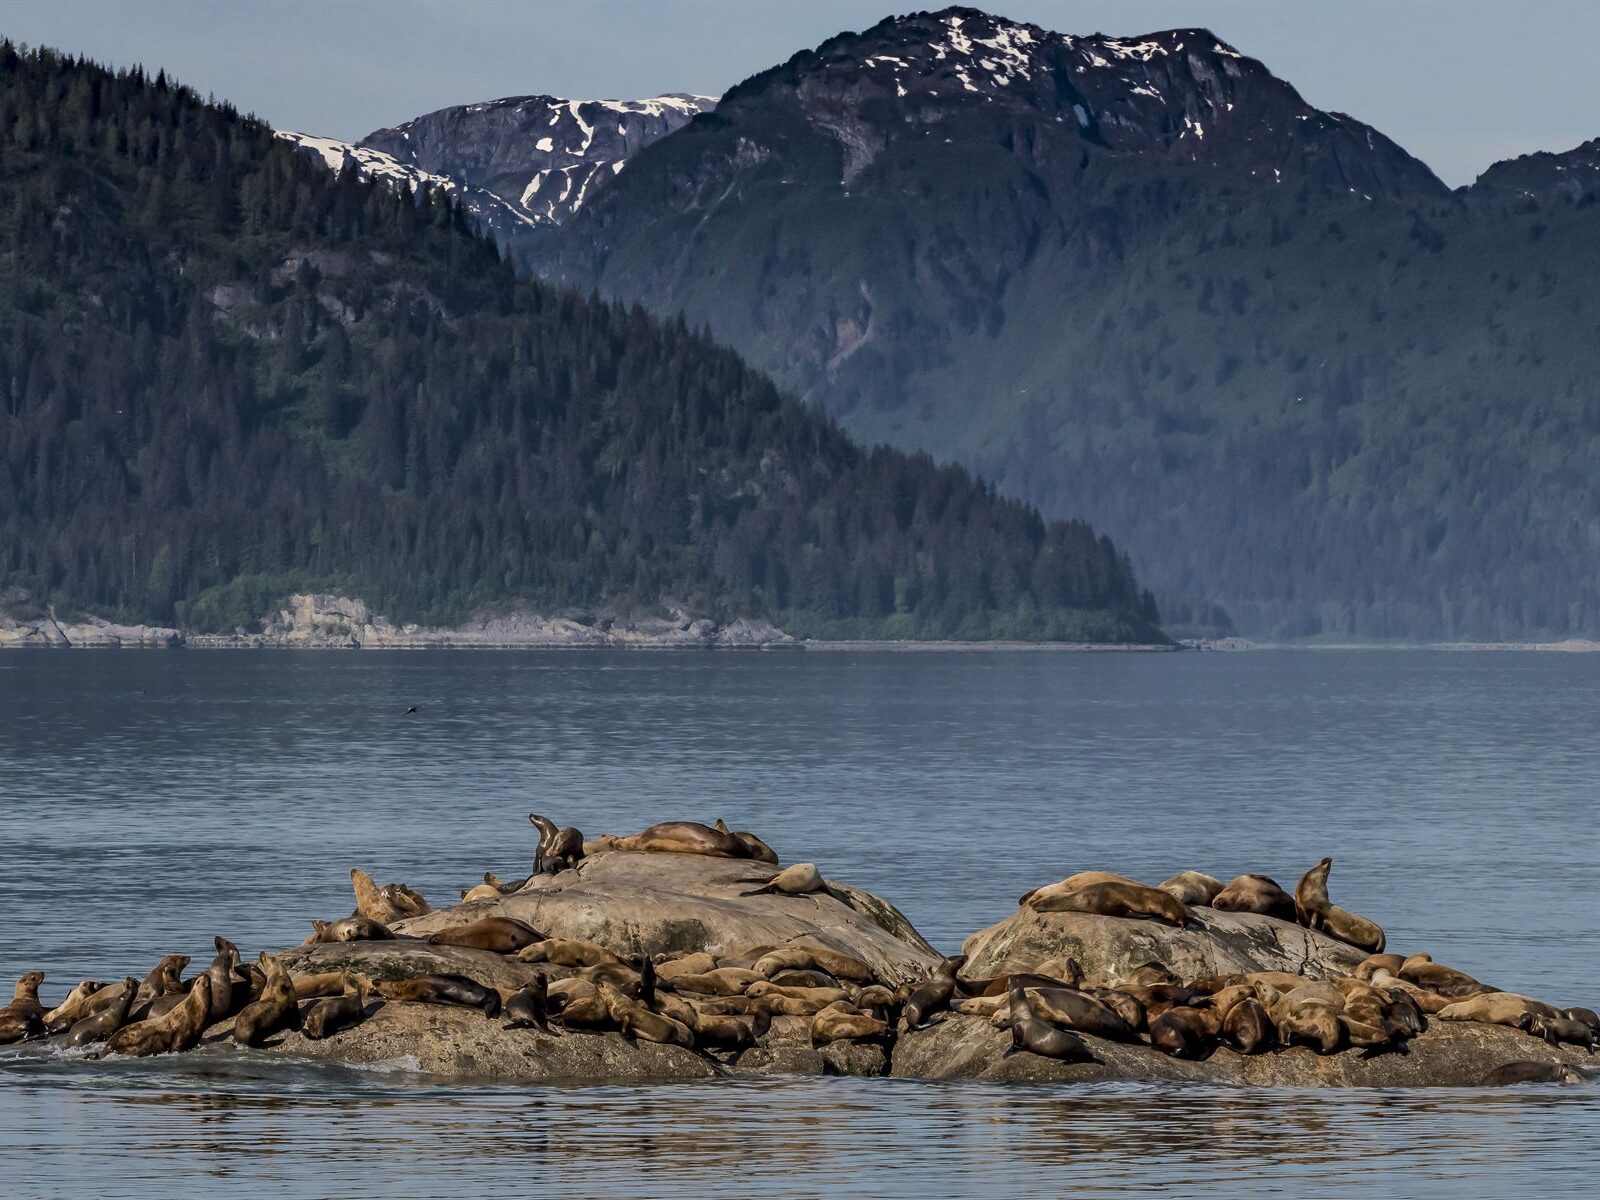 Sea lions taking a break on a small rocky island within sight of shore